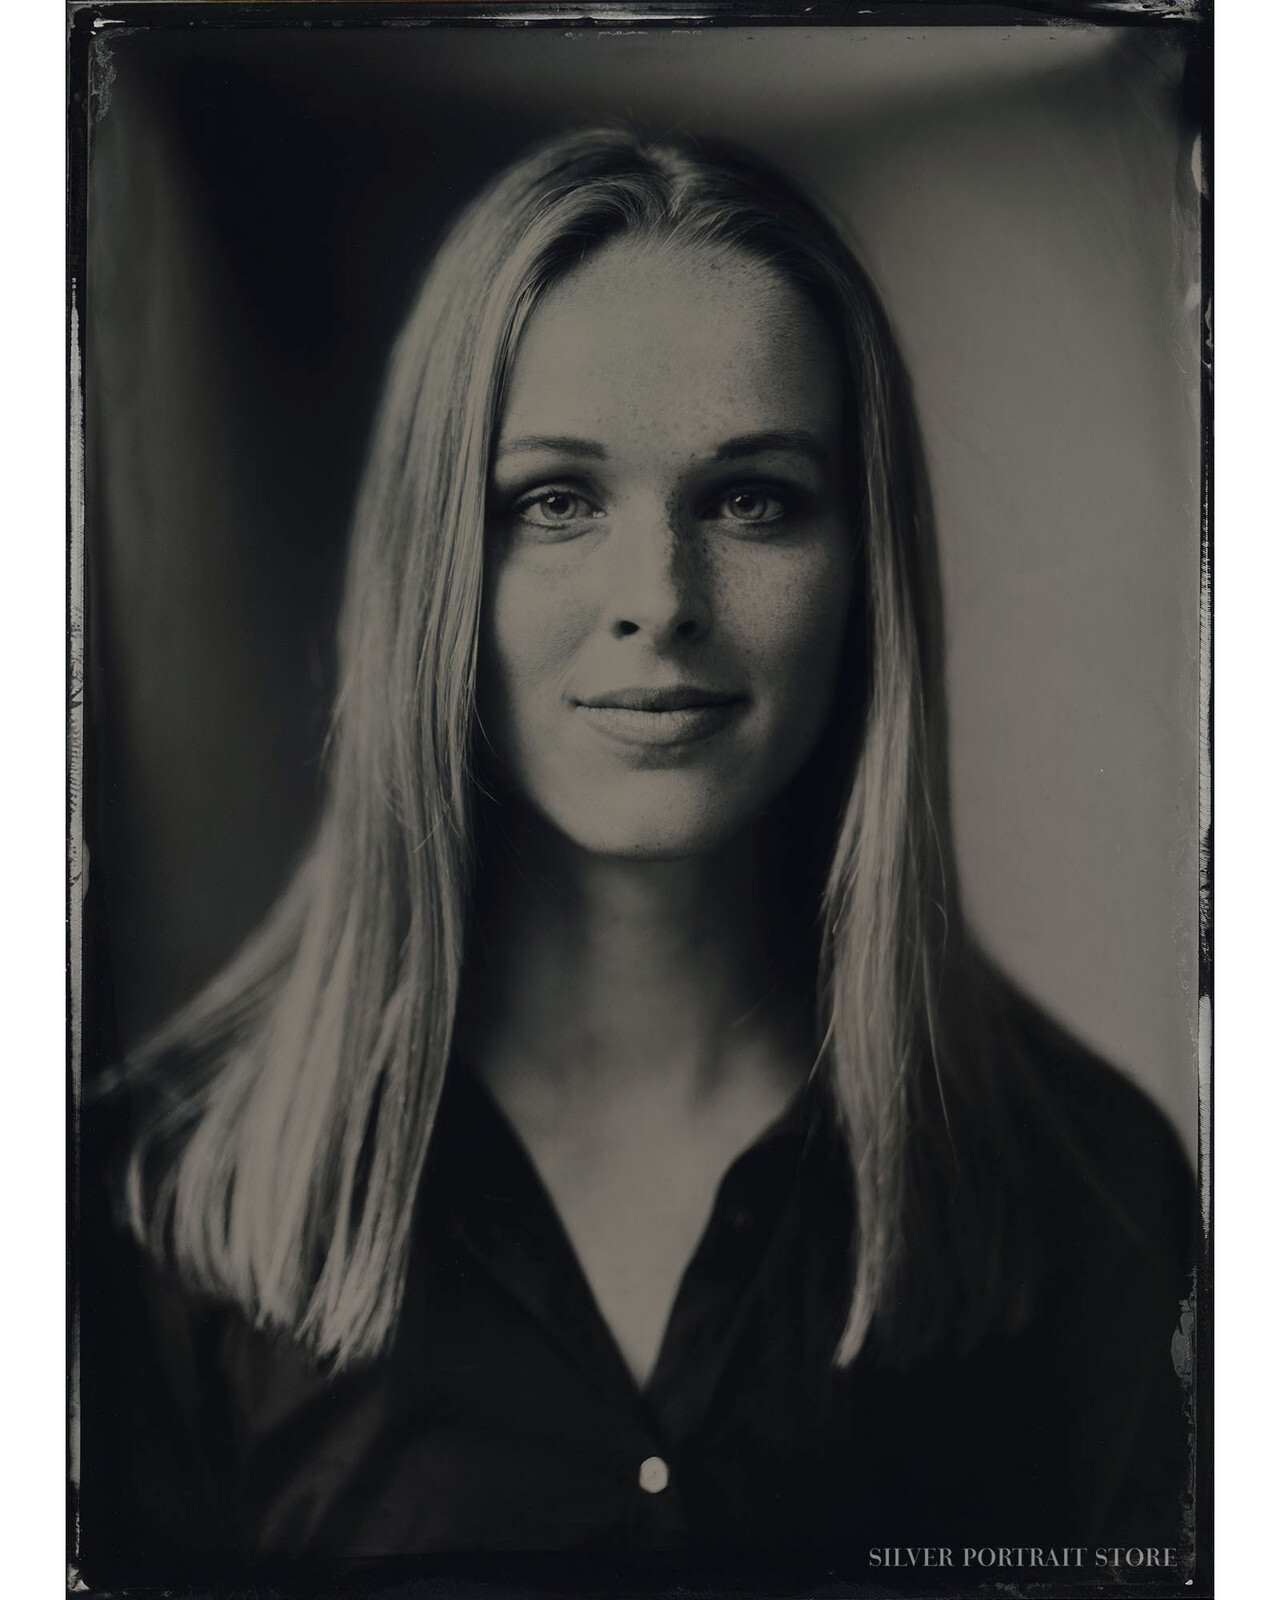 Pien-Silver Portrait Store-scan from Wet plate collodion-Tintype 13 x 18 cm.